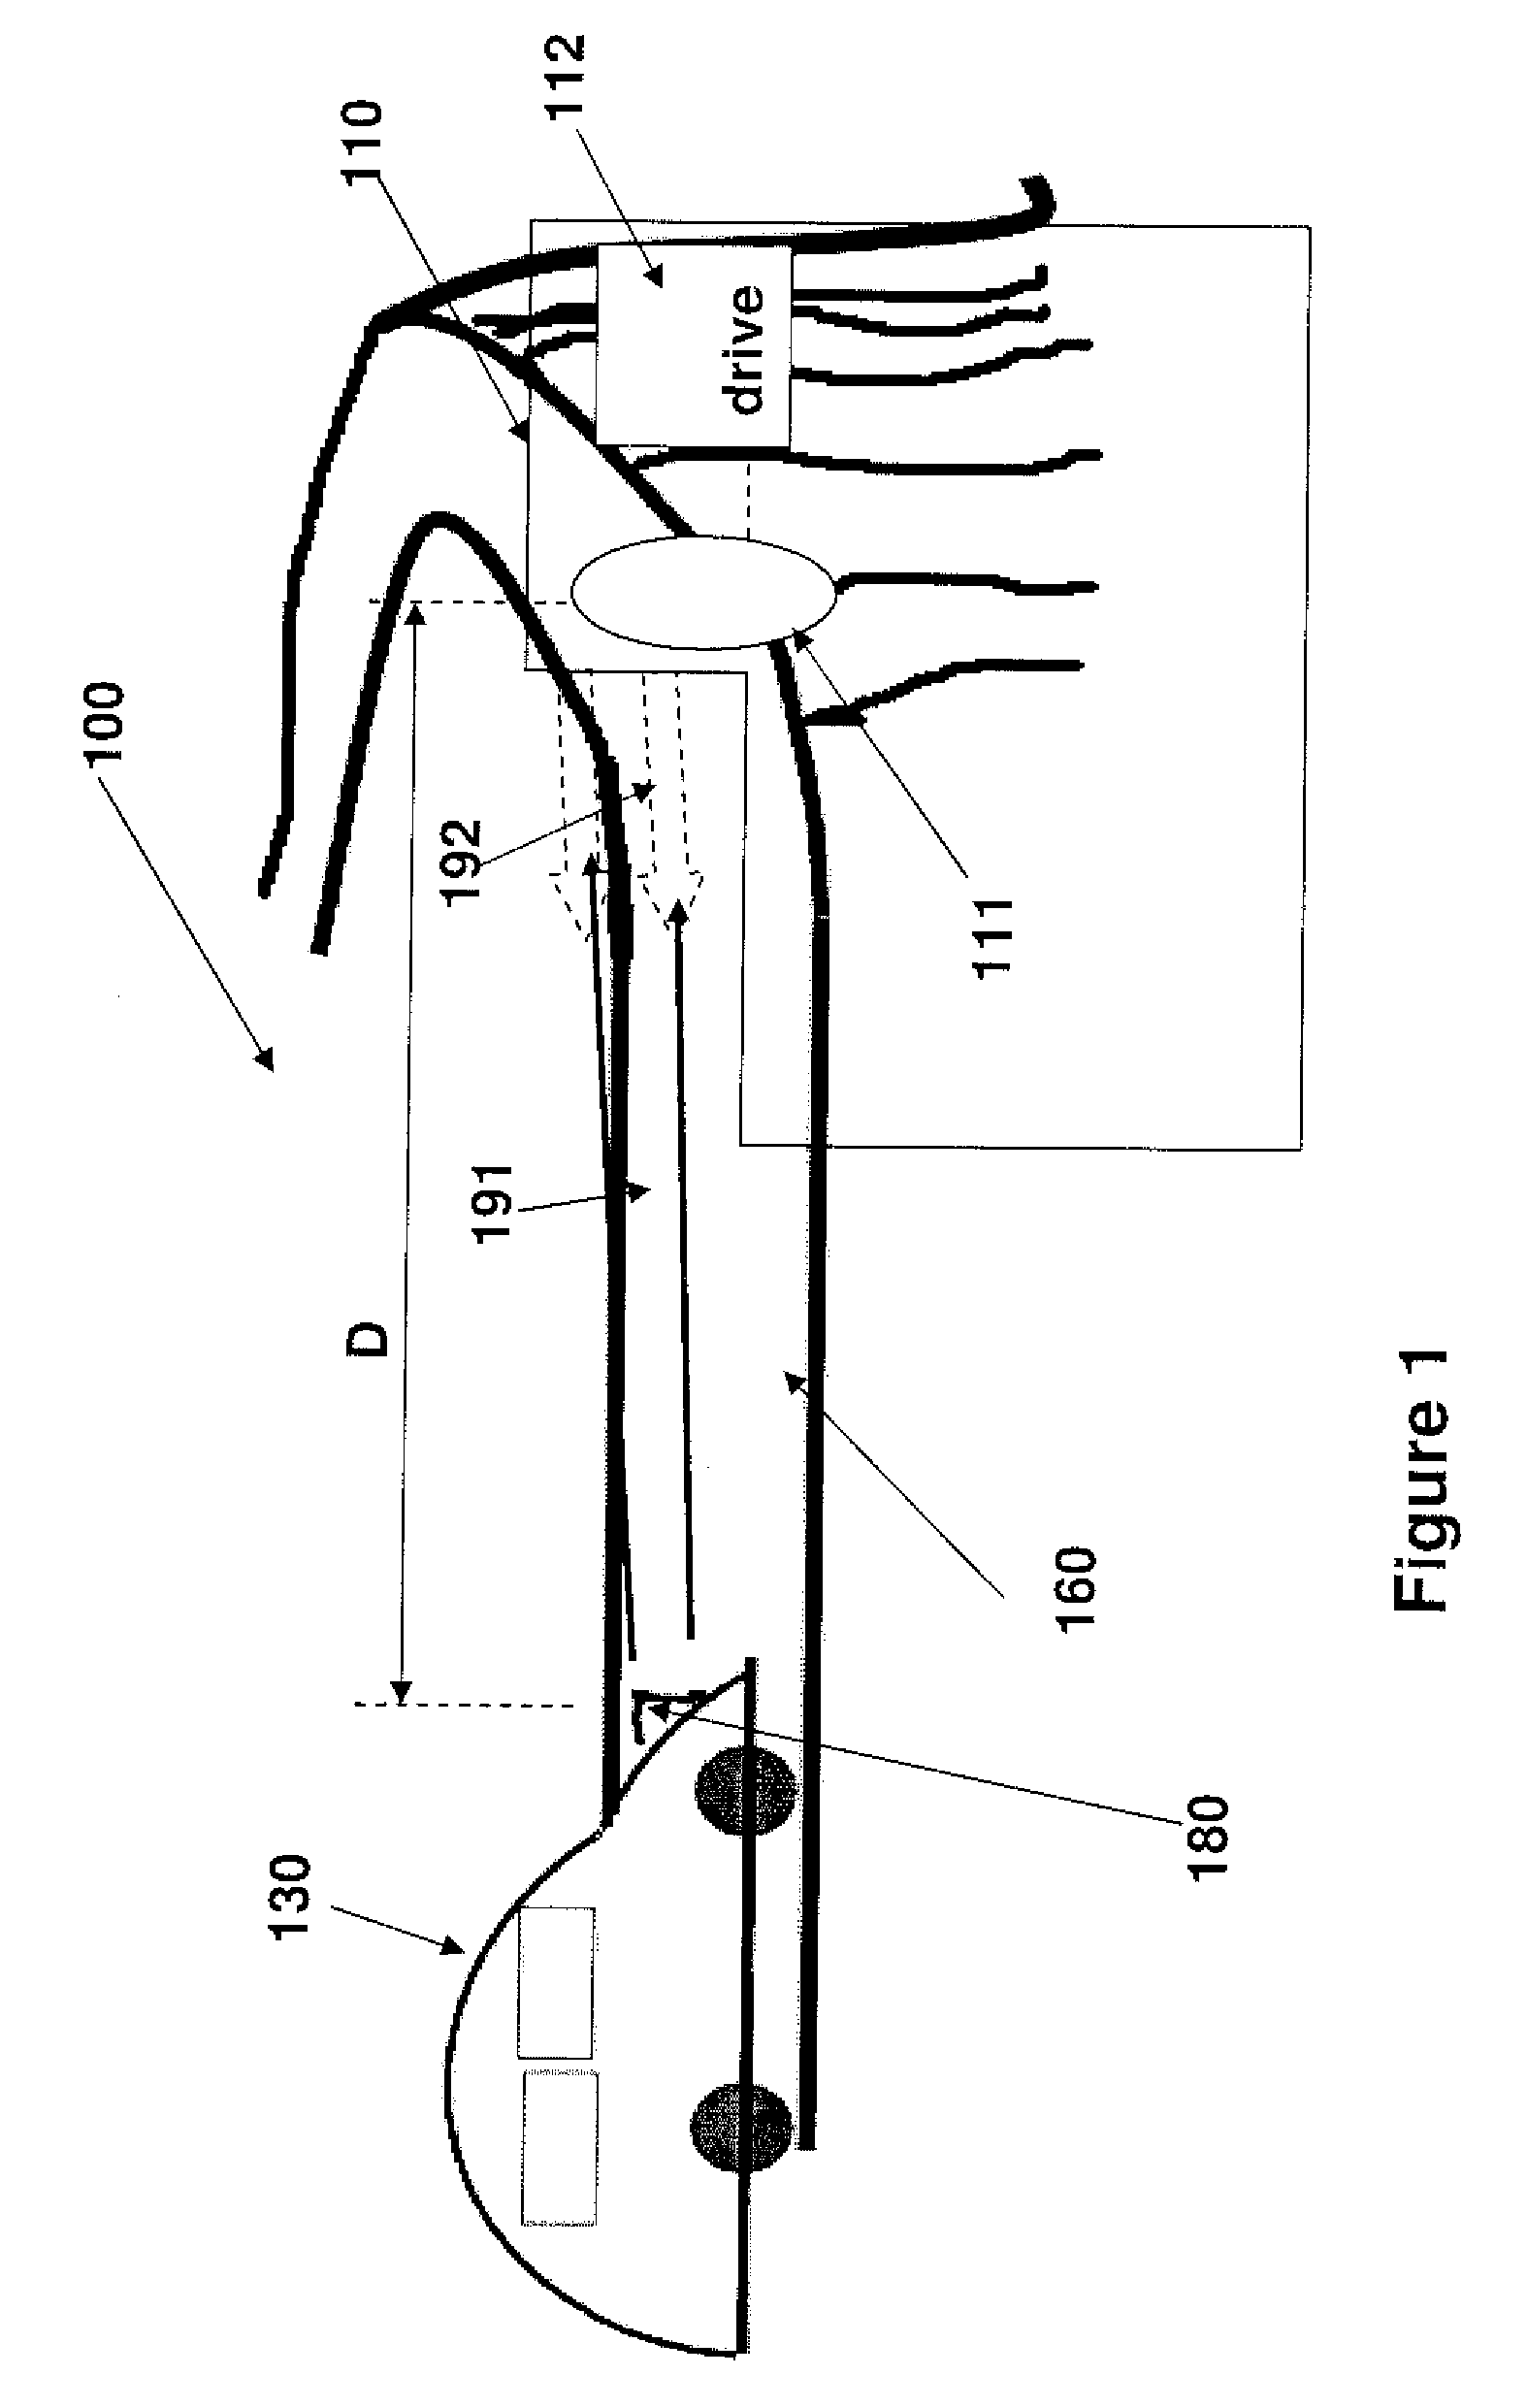 Device, System and Method of Retro-Modulating Safety Signs